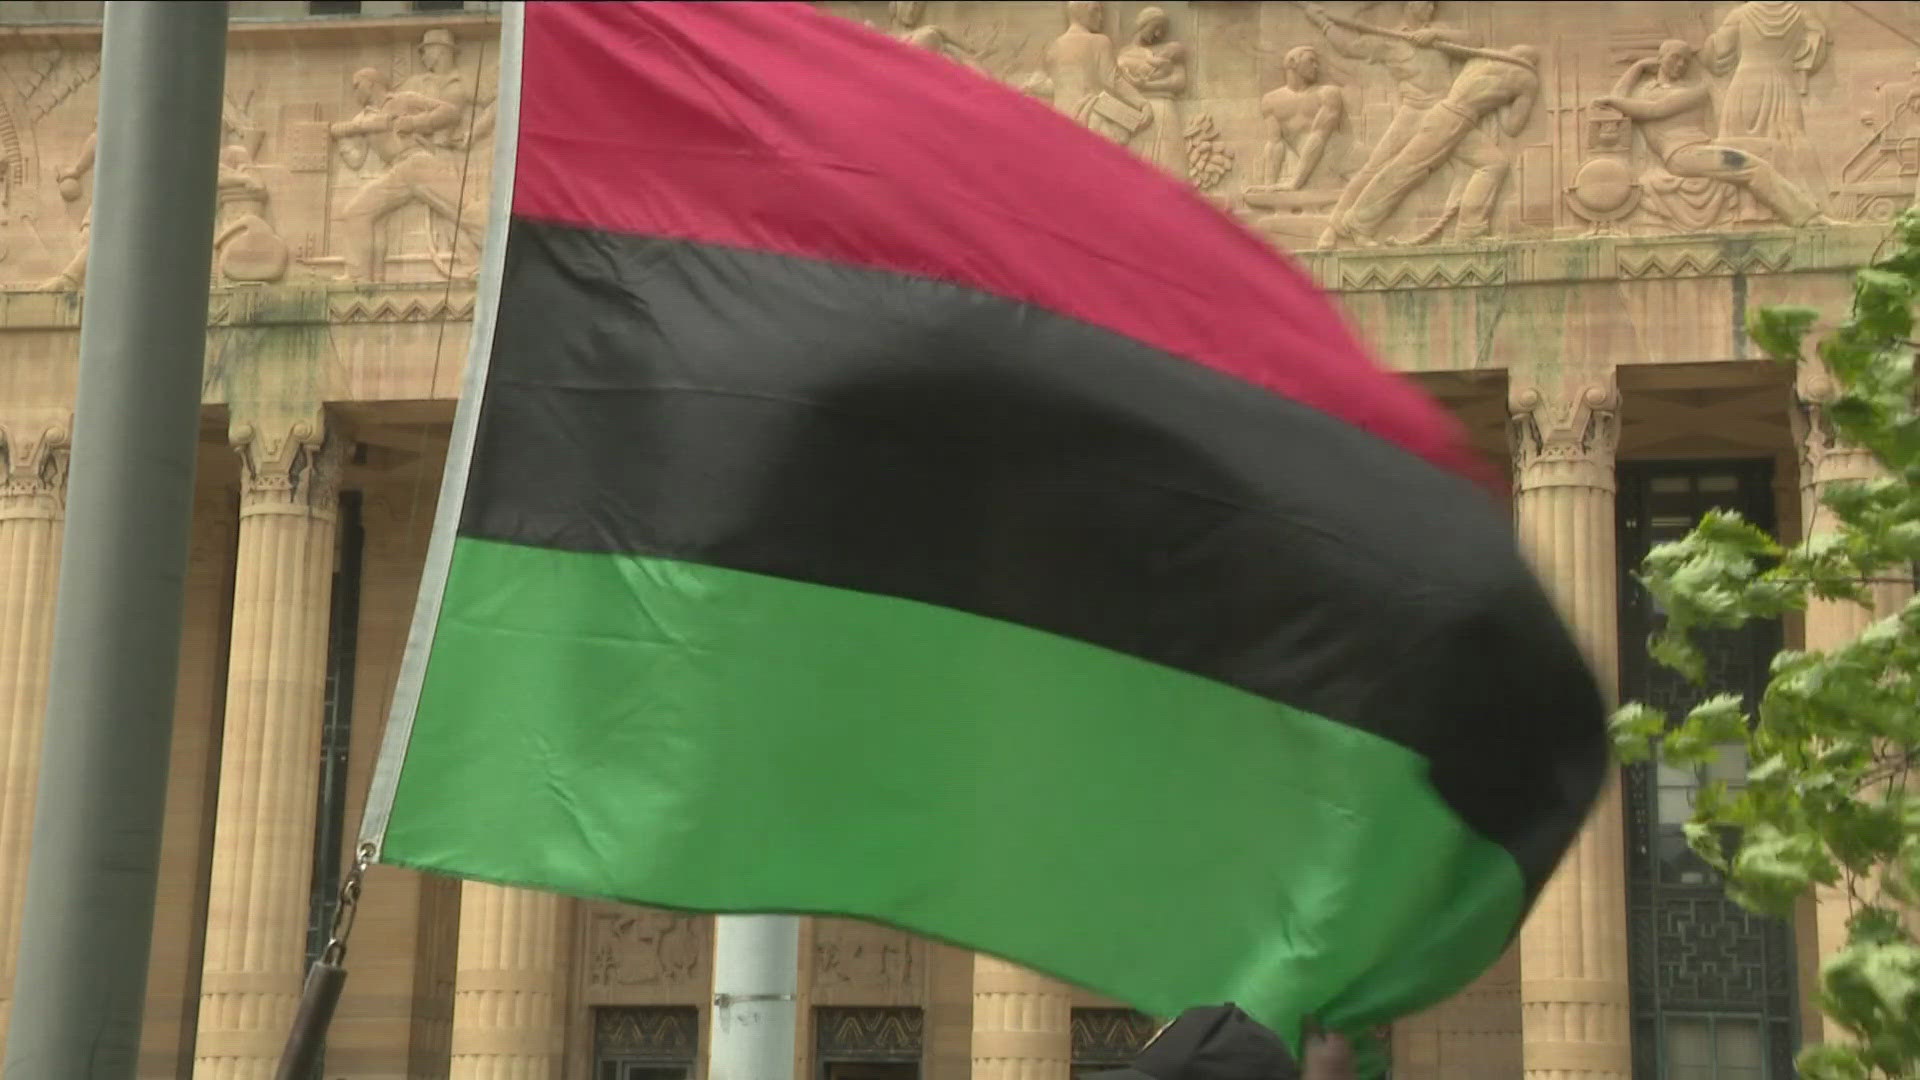 The Pan African flag was raised outside of Buffalo City Hall